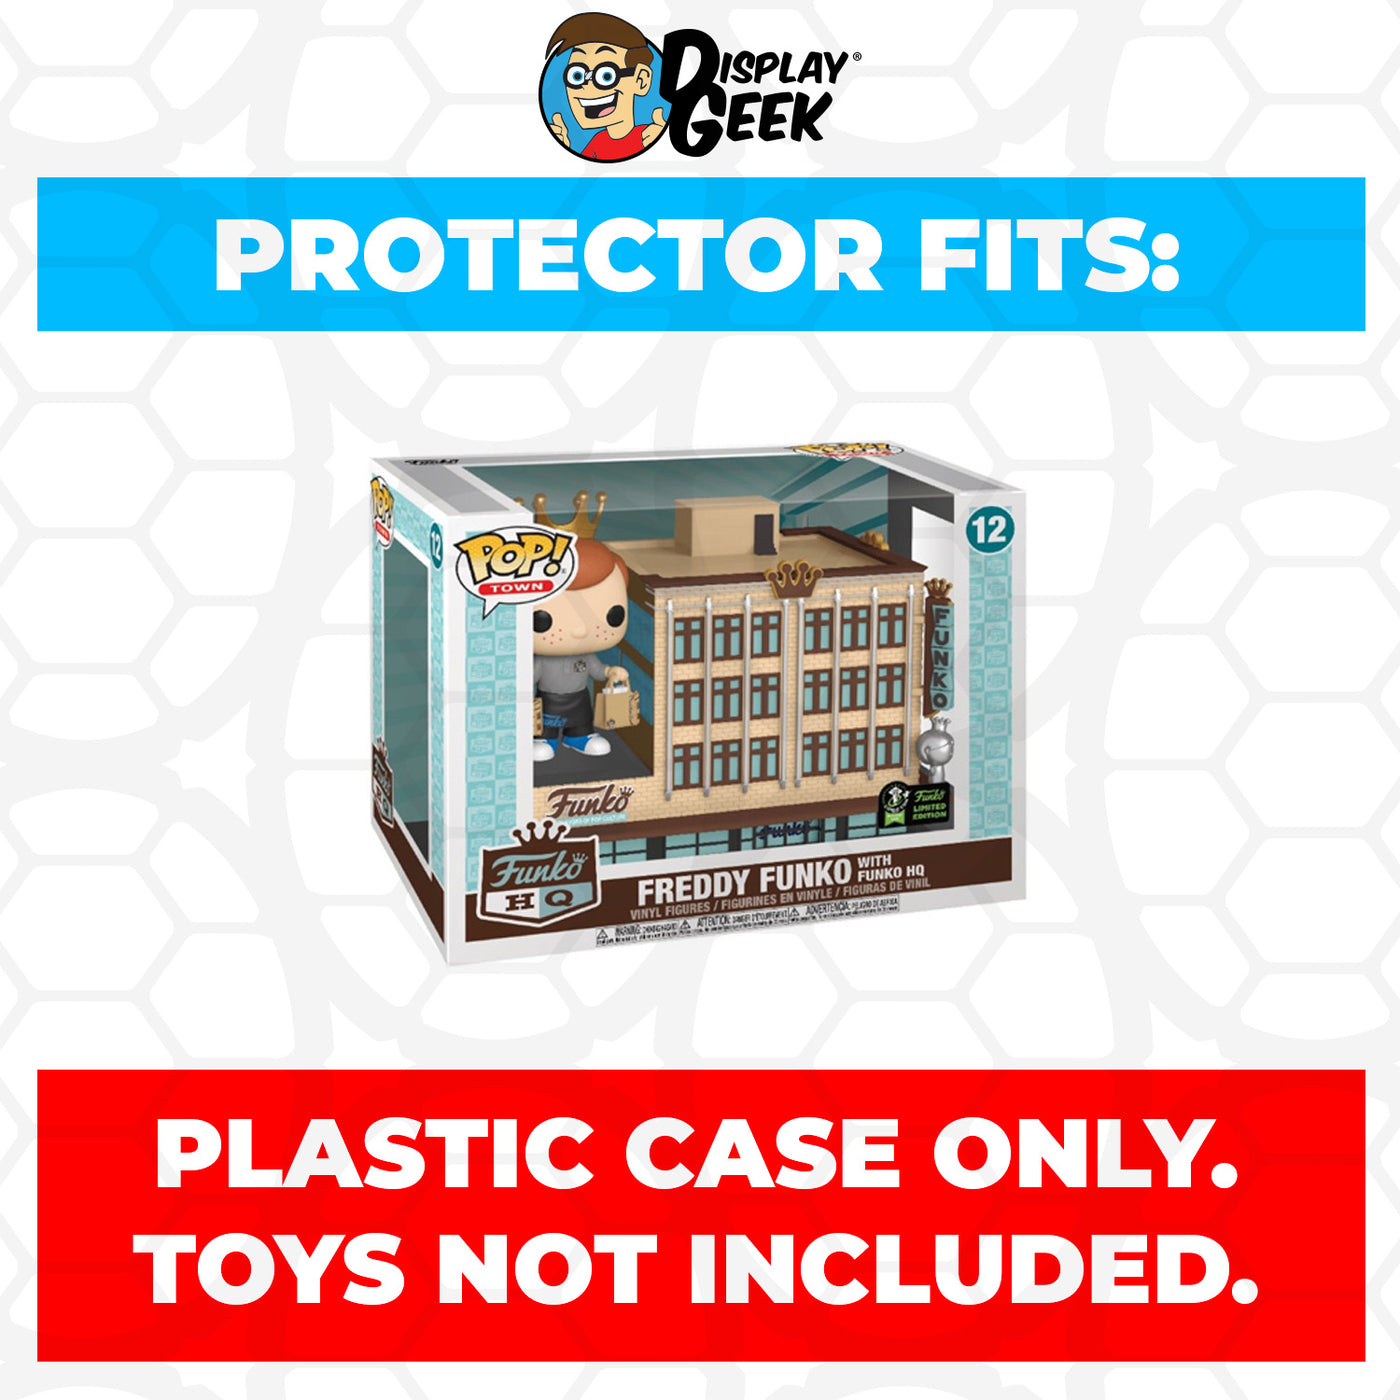 Pop Protector for Freddy Funko with Funko HQ ECCC #12 Funko Pop on The Protector Guide App by Display Geek